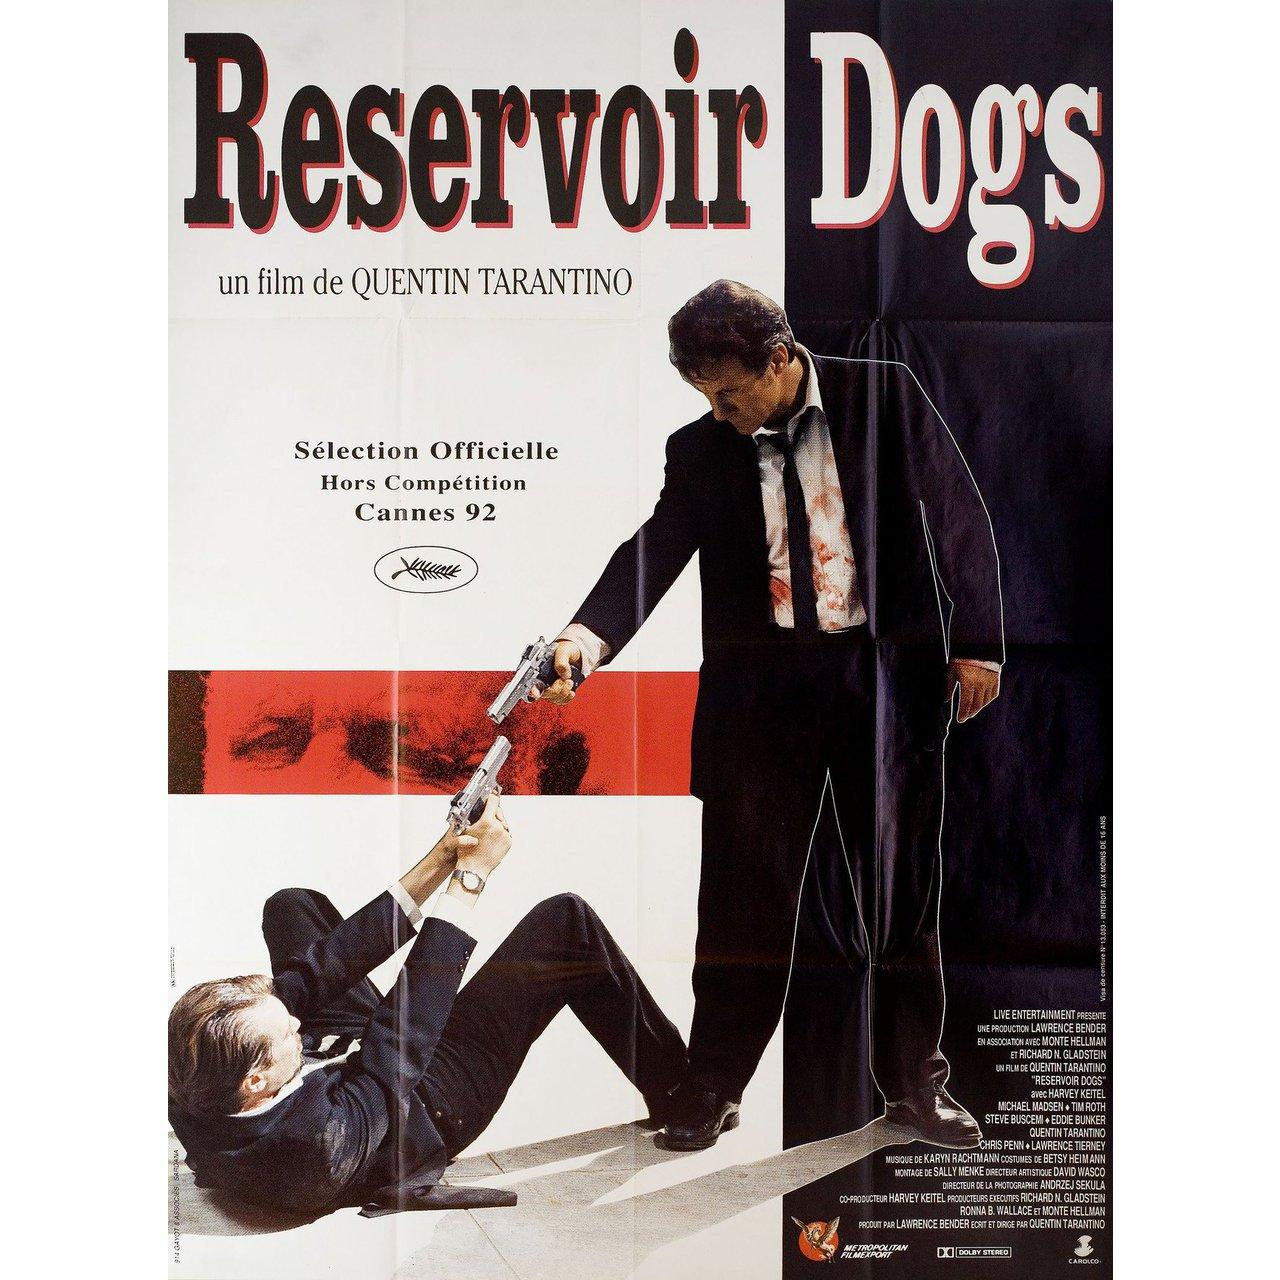 Original 1992 French grande poster for the film Reservoir Dogs directed by Quentin Tarantino with Harvey Keitel / Tim Roth / Michael Madsen / Chris Penn. Fine condition, folded. Many original posters were issued folded or were subsequently folded.